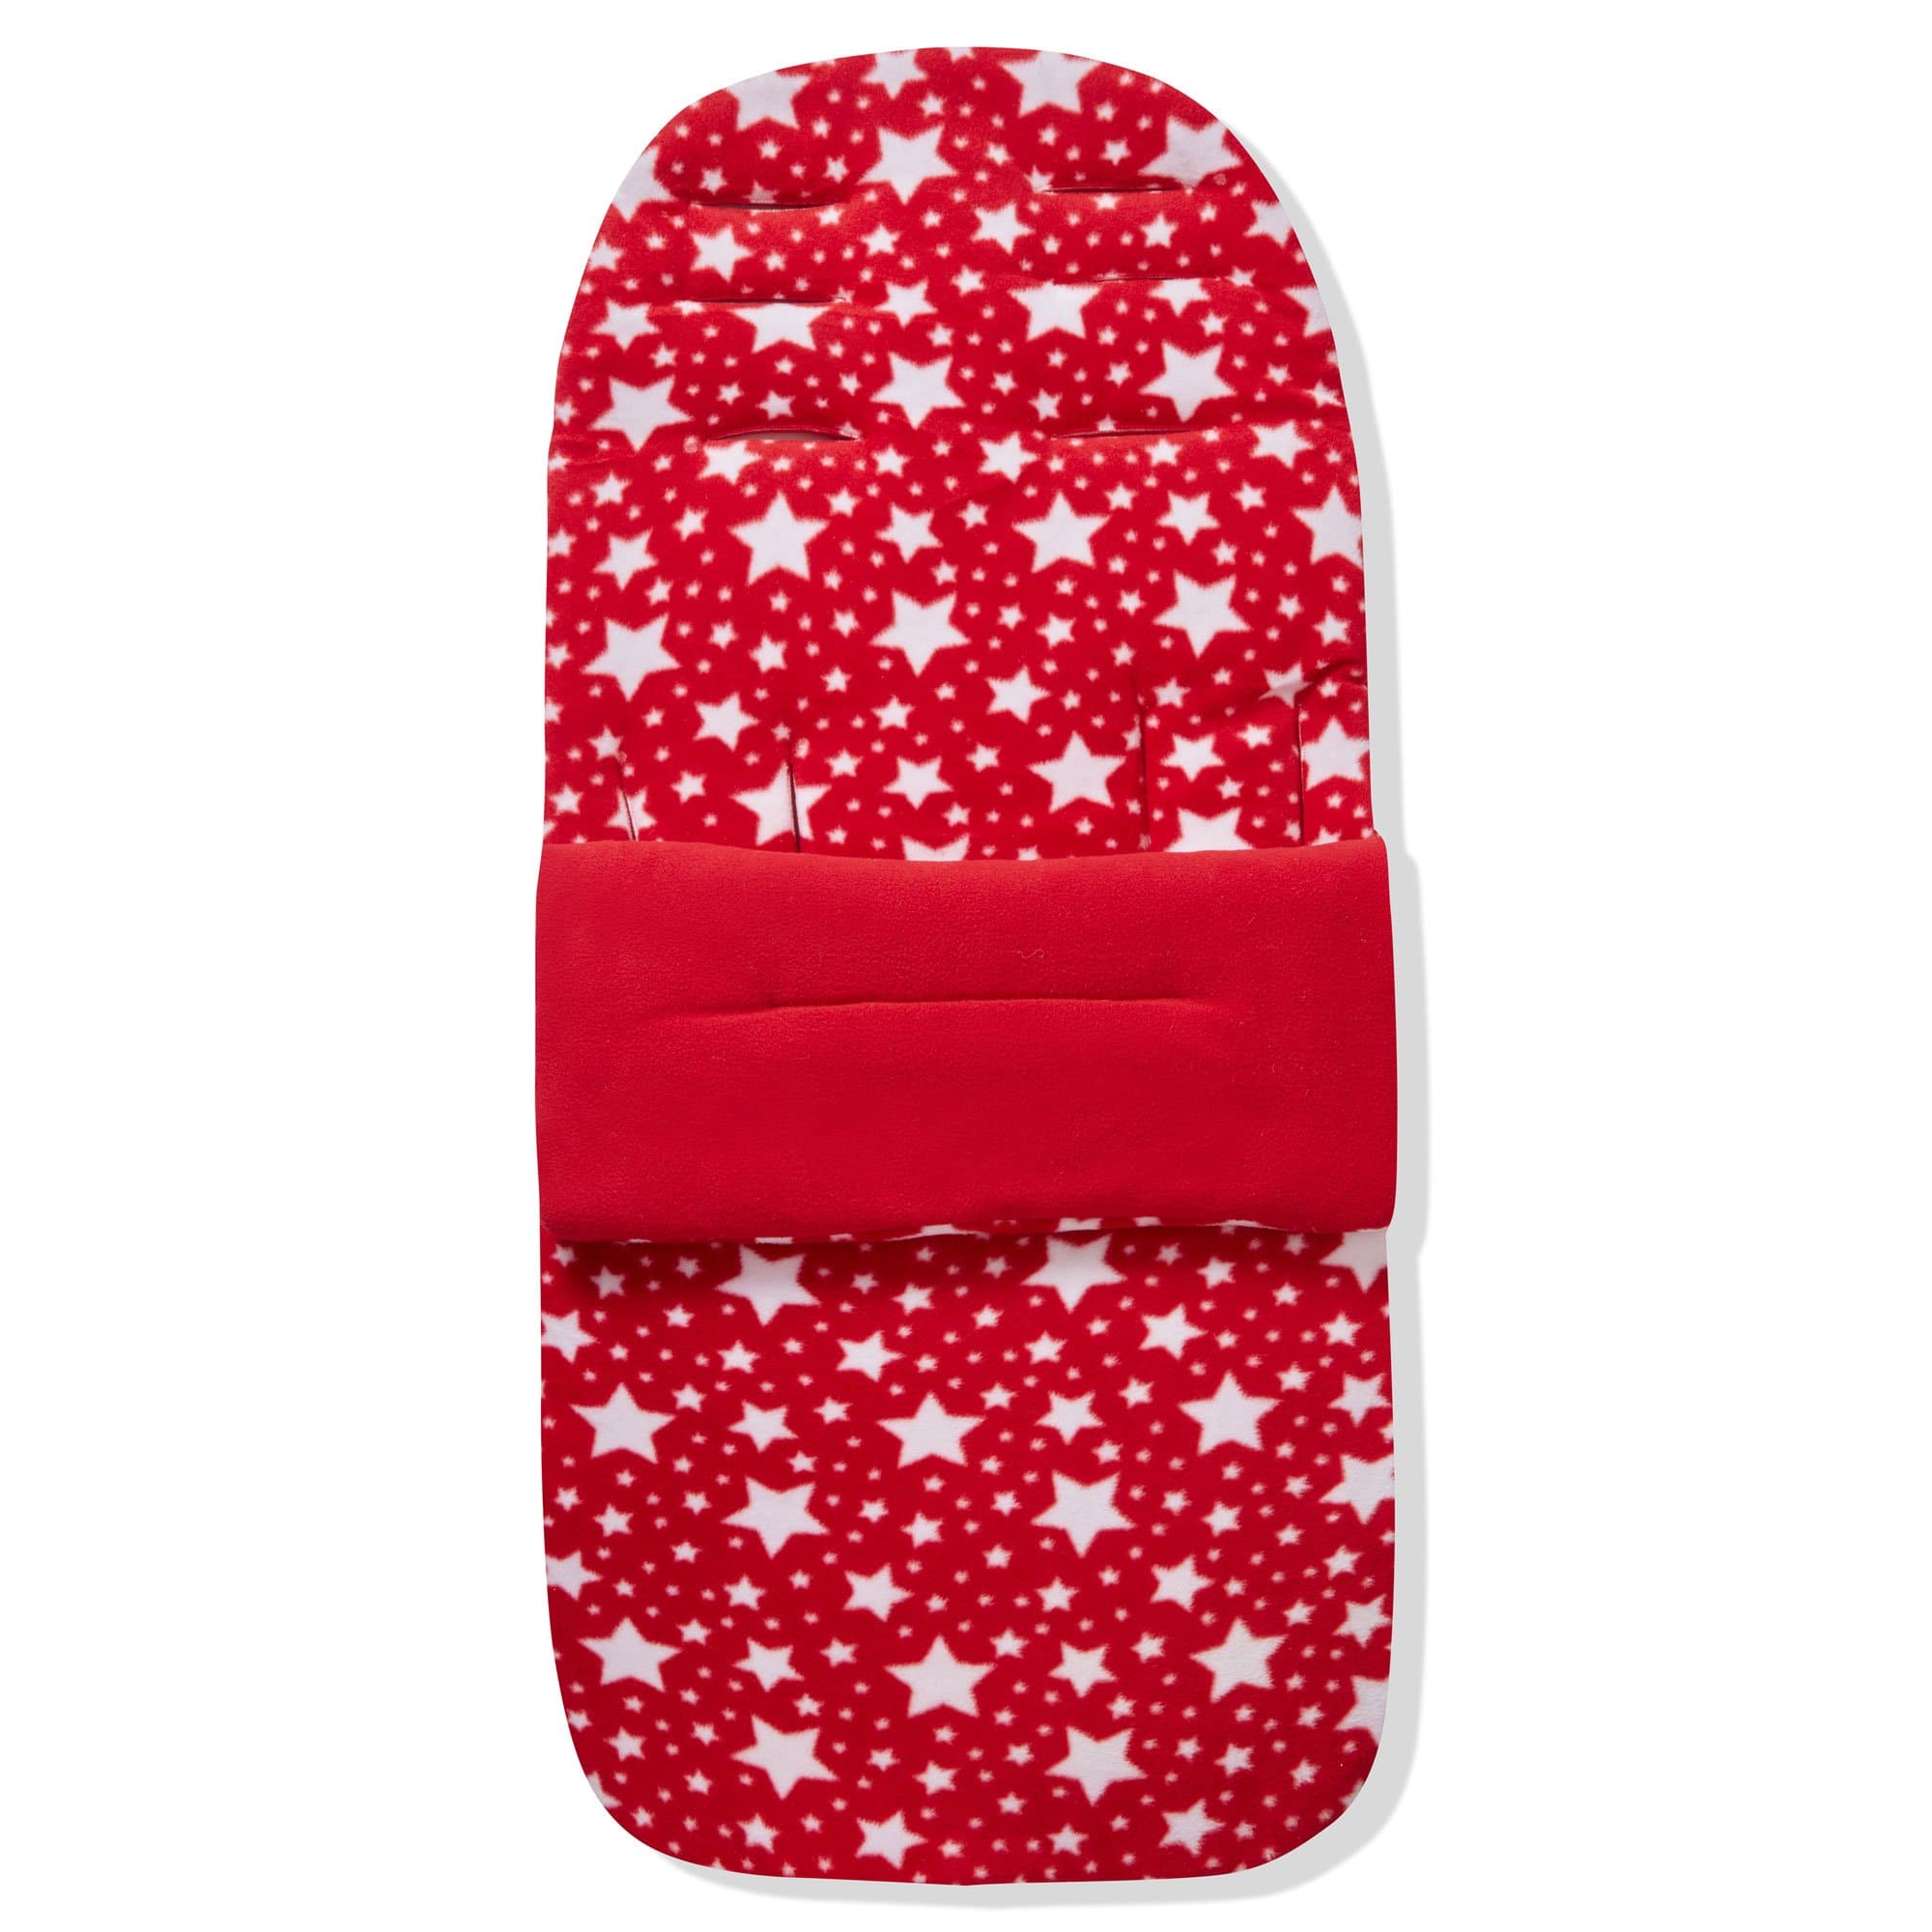 Fleece Footmuff / Cosy Toes Compatible with BOB - Red Star / Fits All Models | For Your Little One